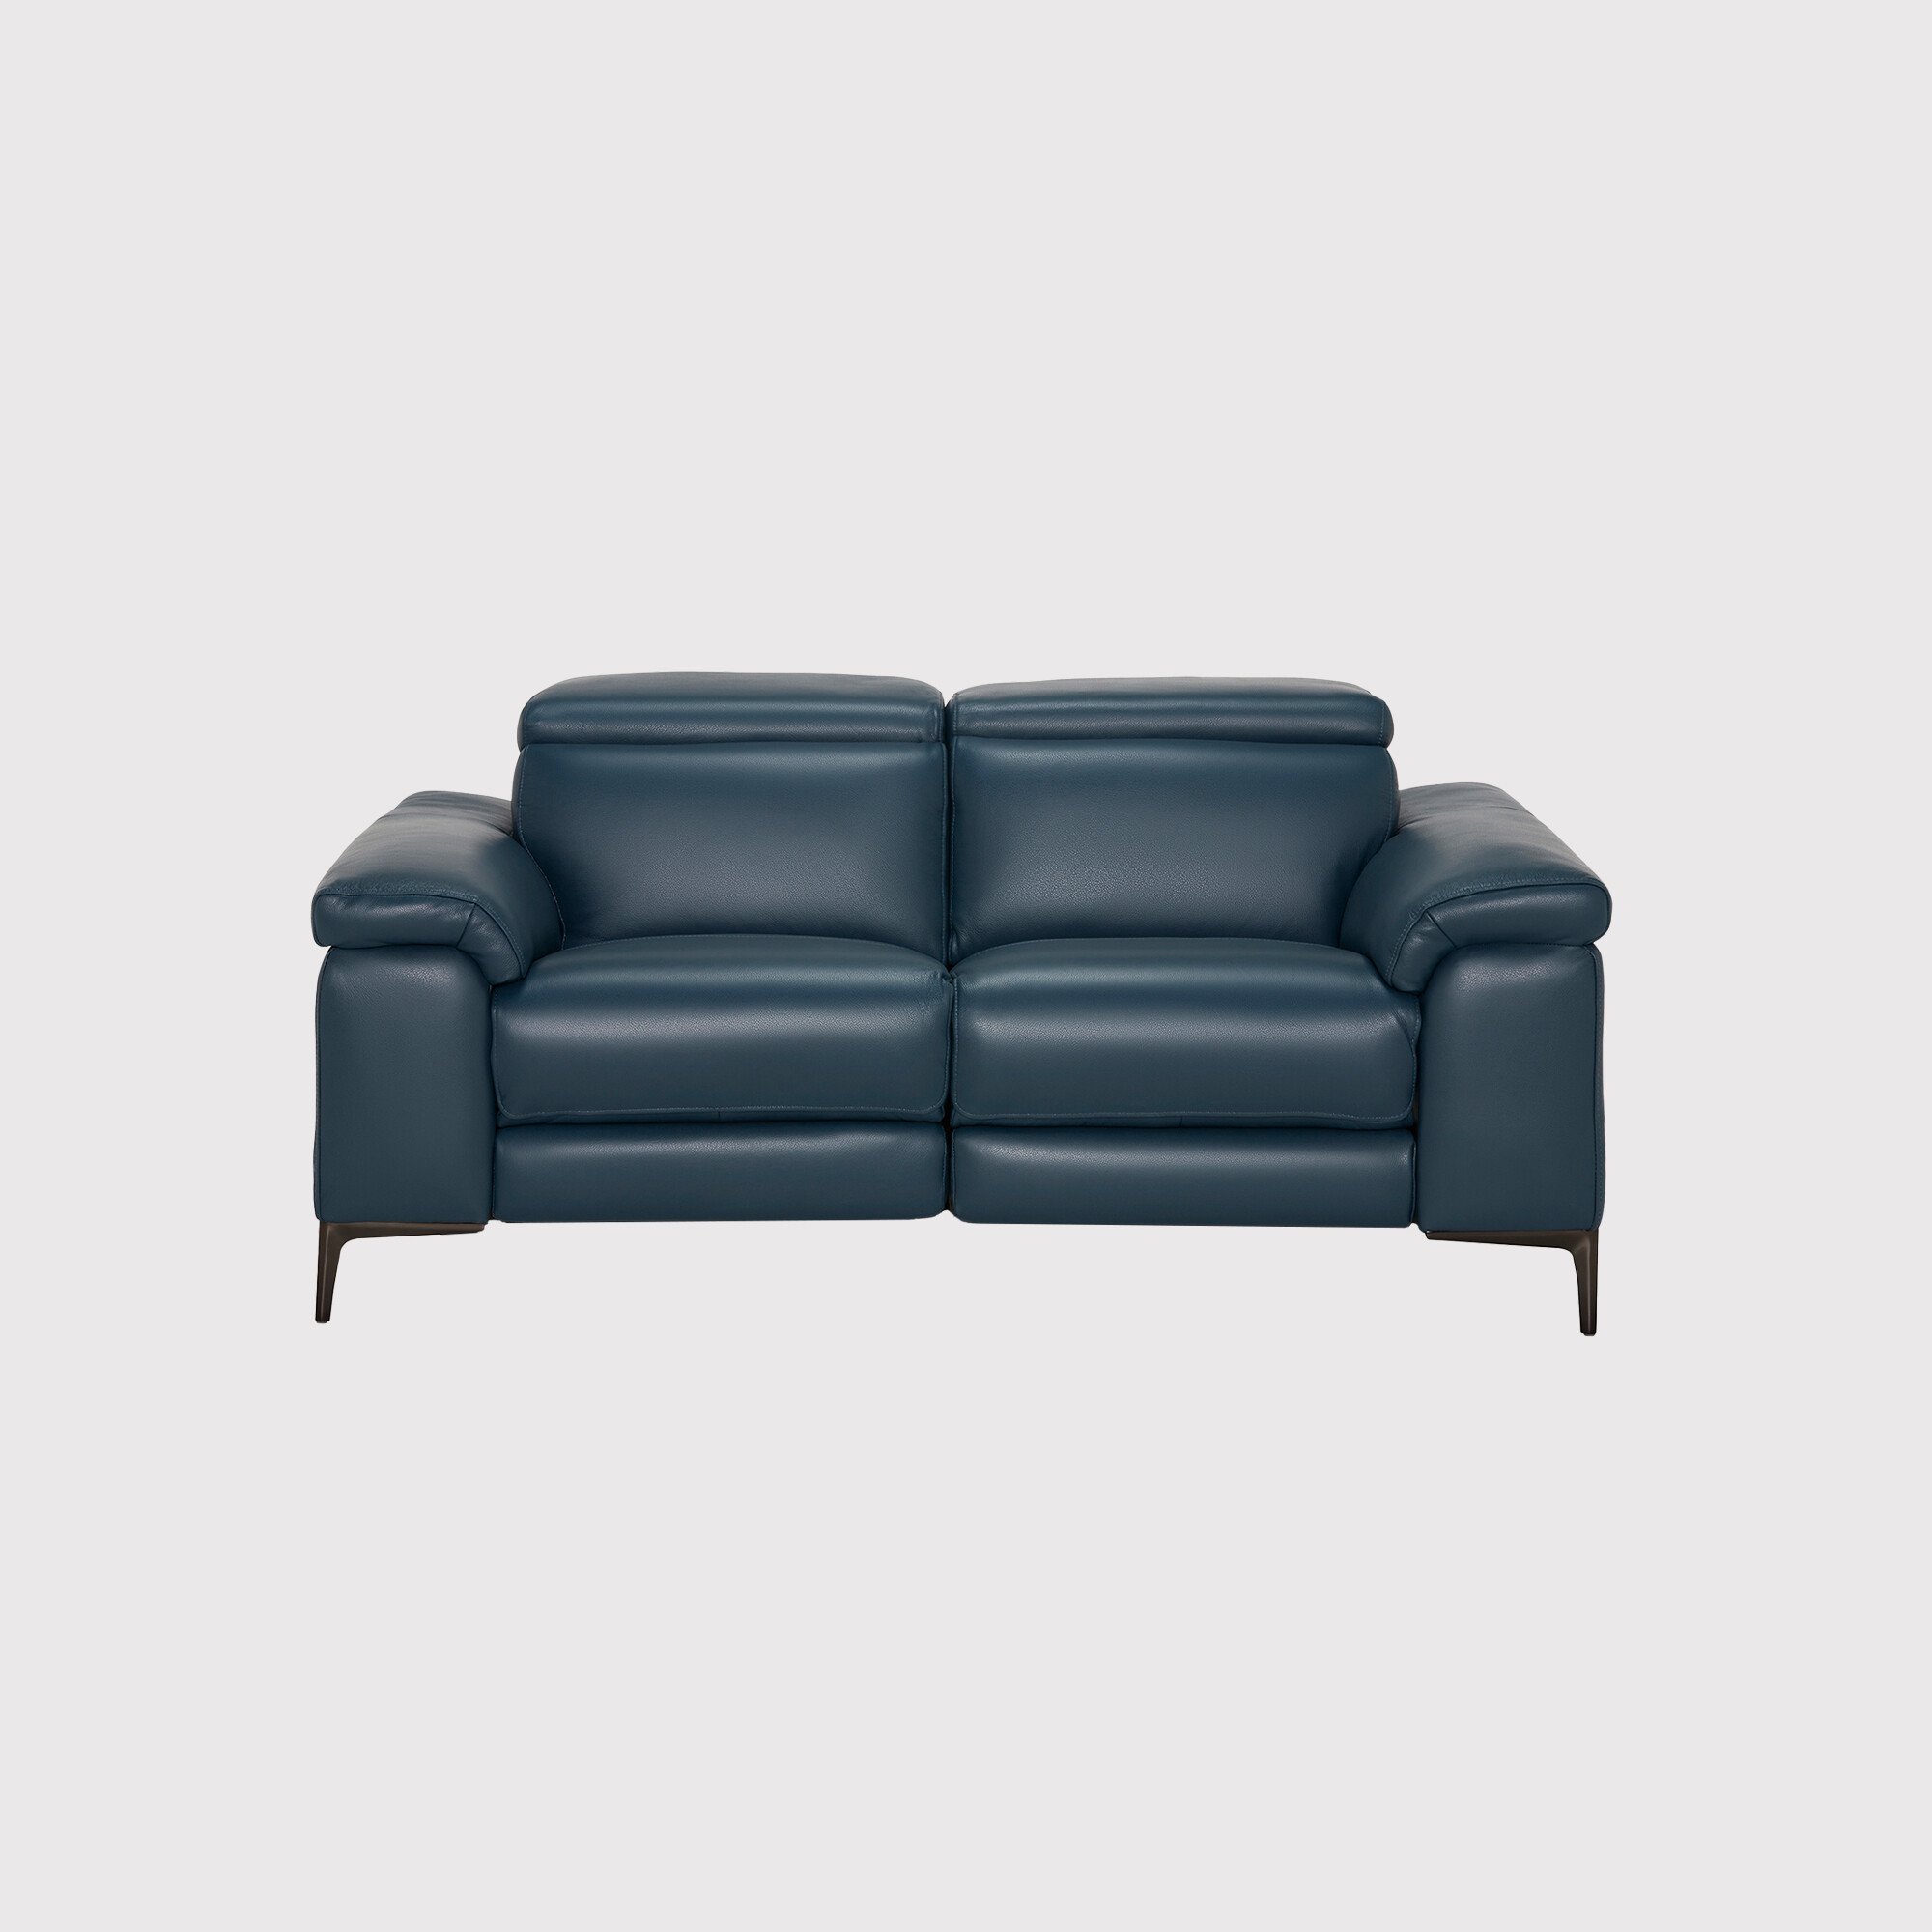 Paolo 2 Seater Electric Recliner Sofa 2 Headrests, Blue Leather | Barker & Stonehouse